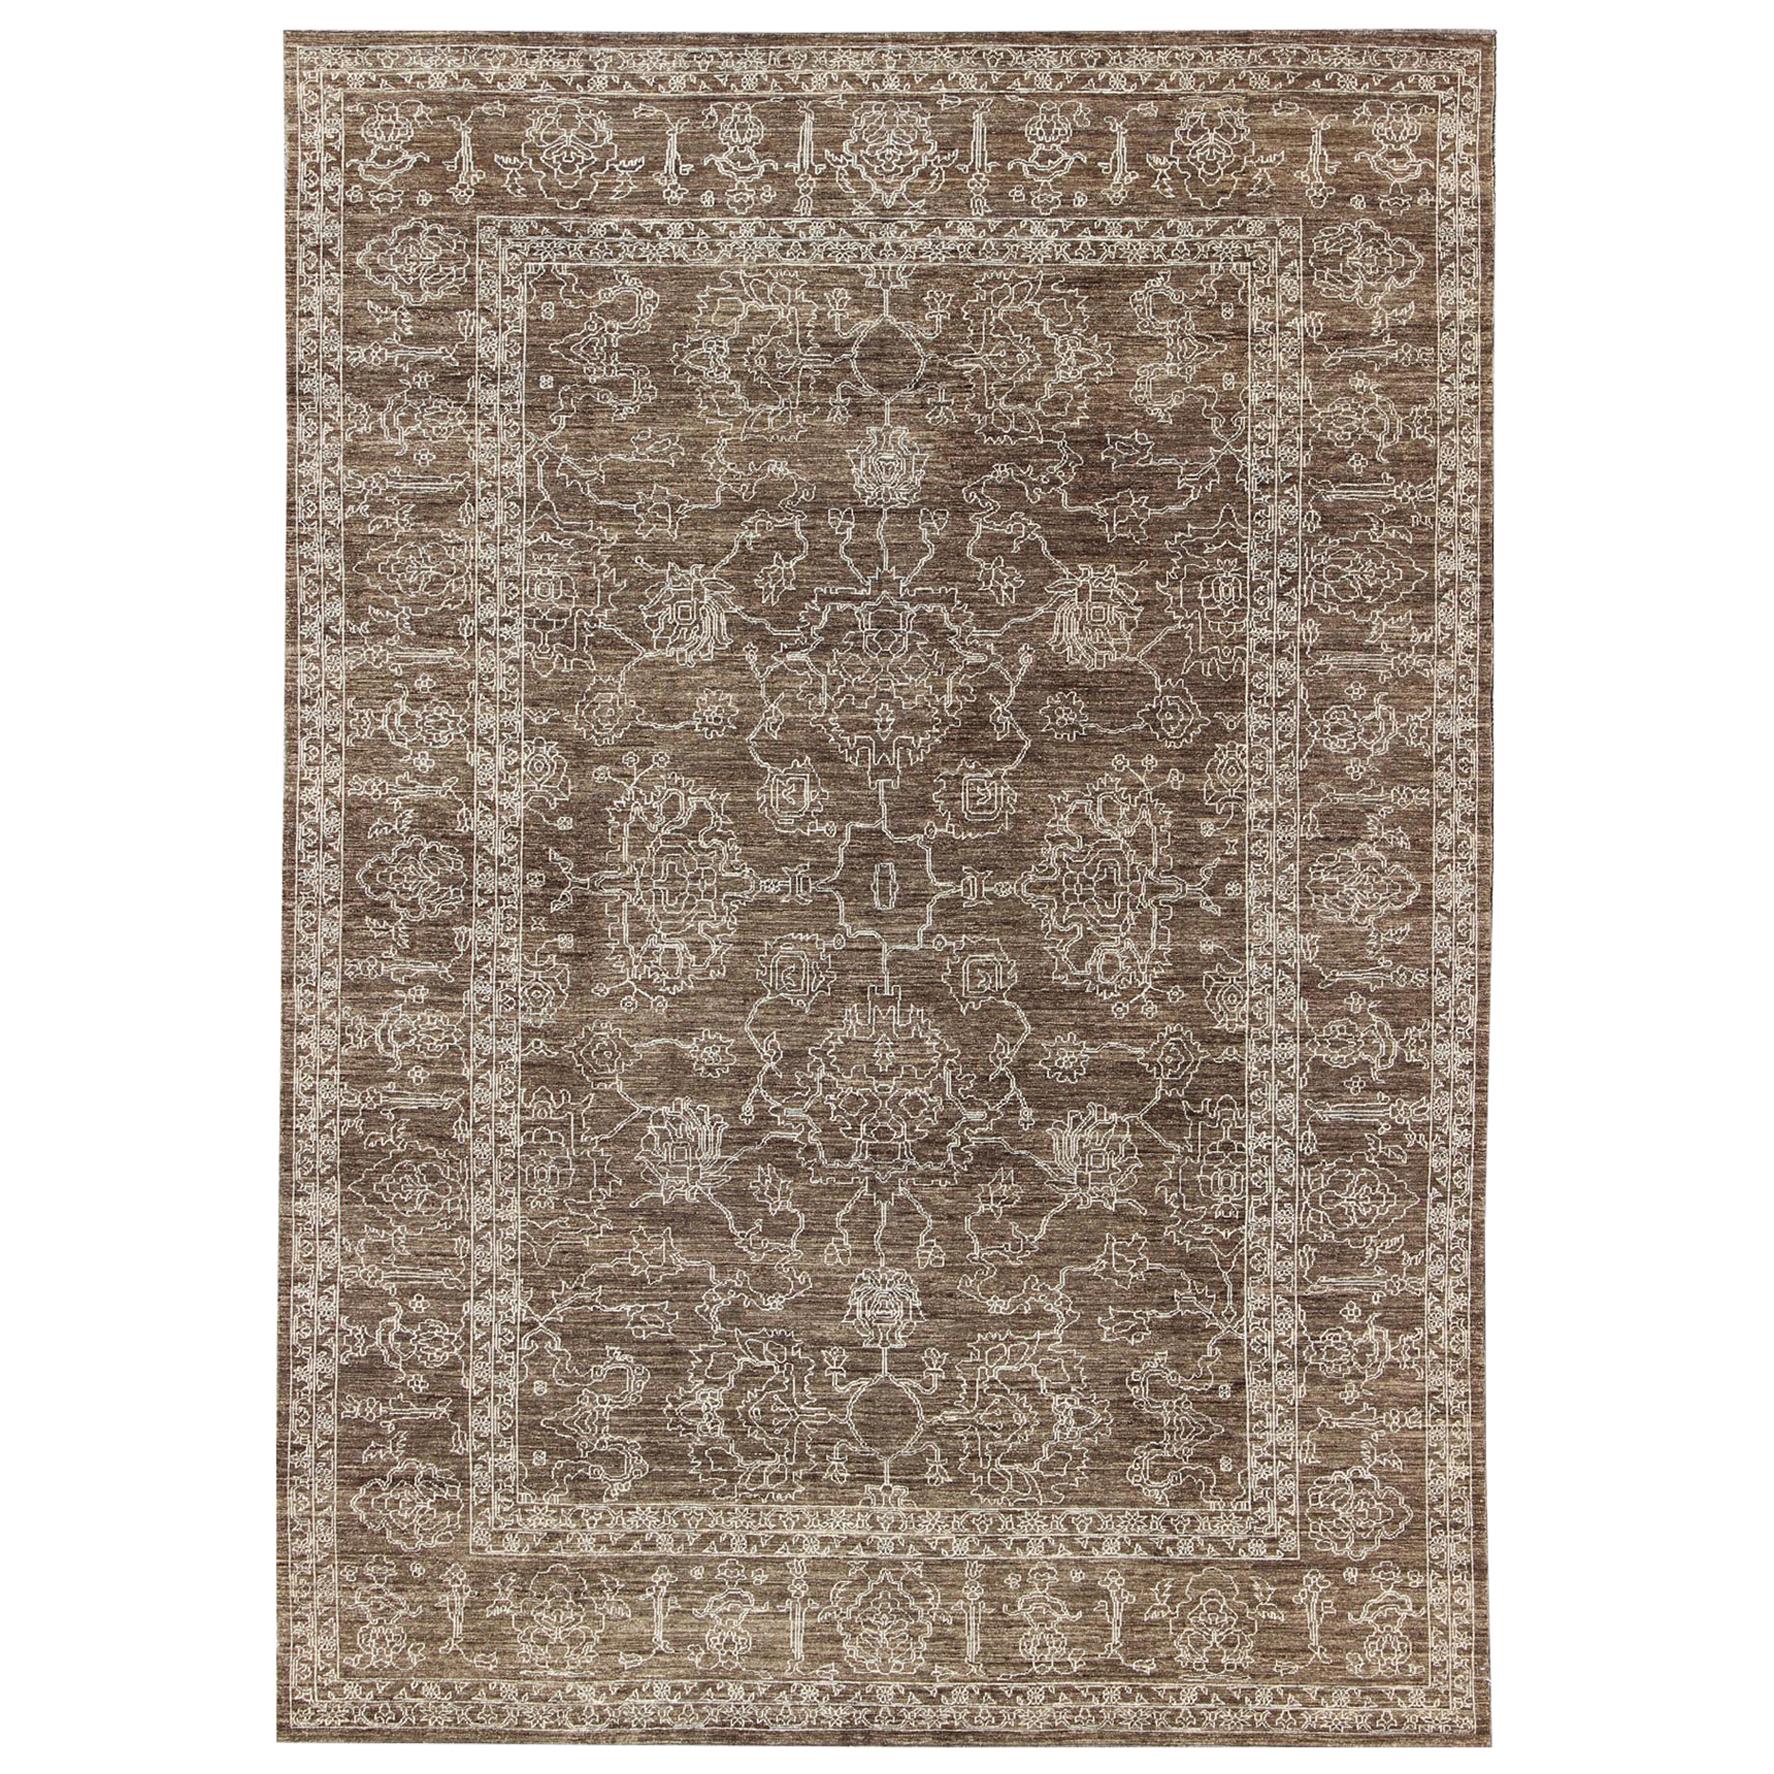 Fine Transitional Rug with Stylized Geometric Motifs in Brown & Tan For Sale